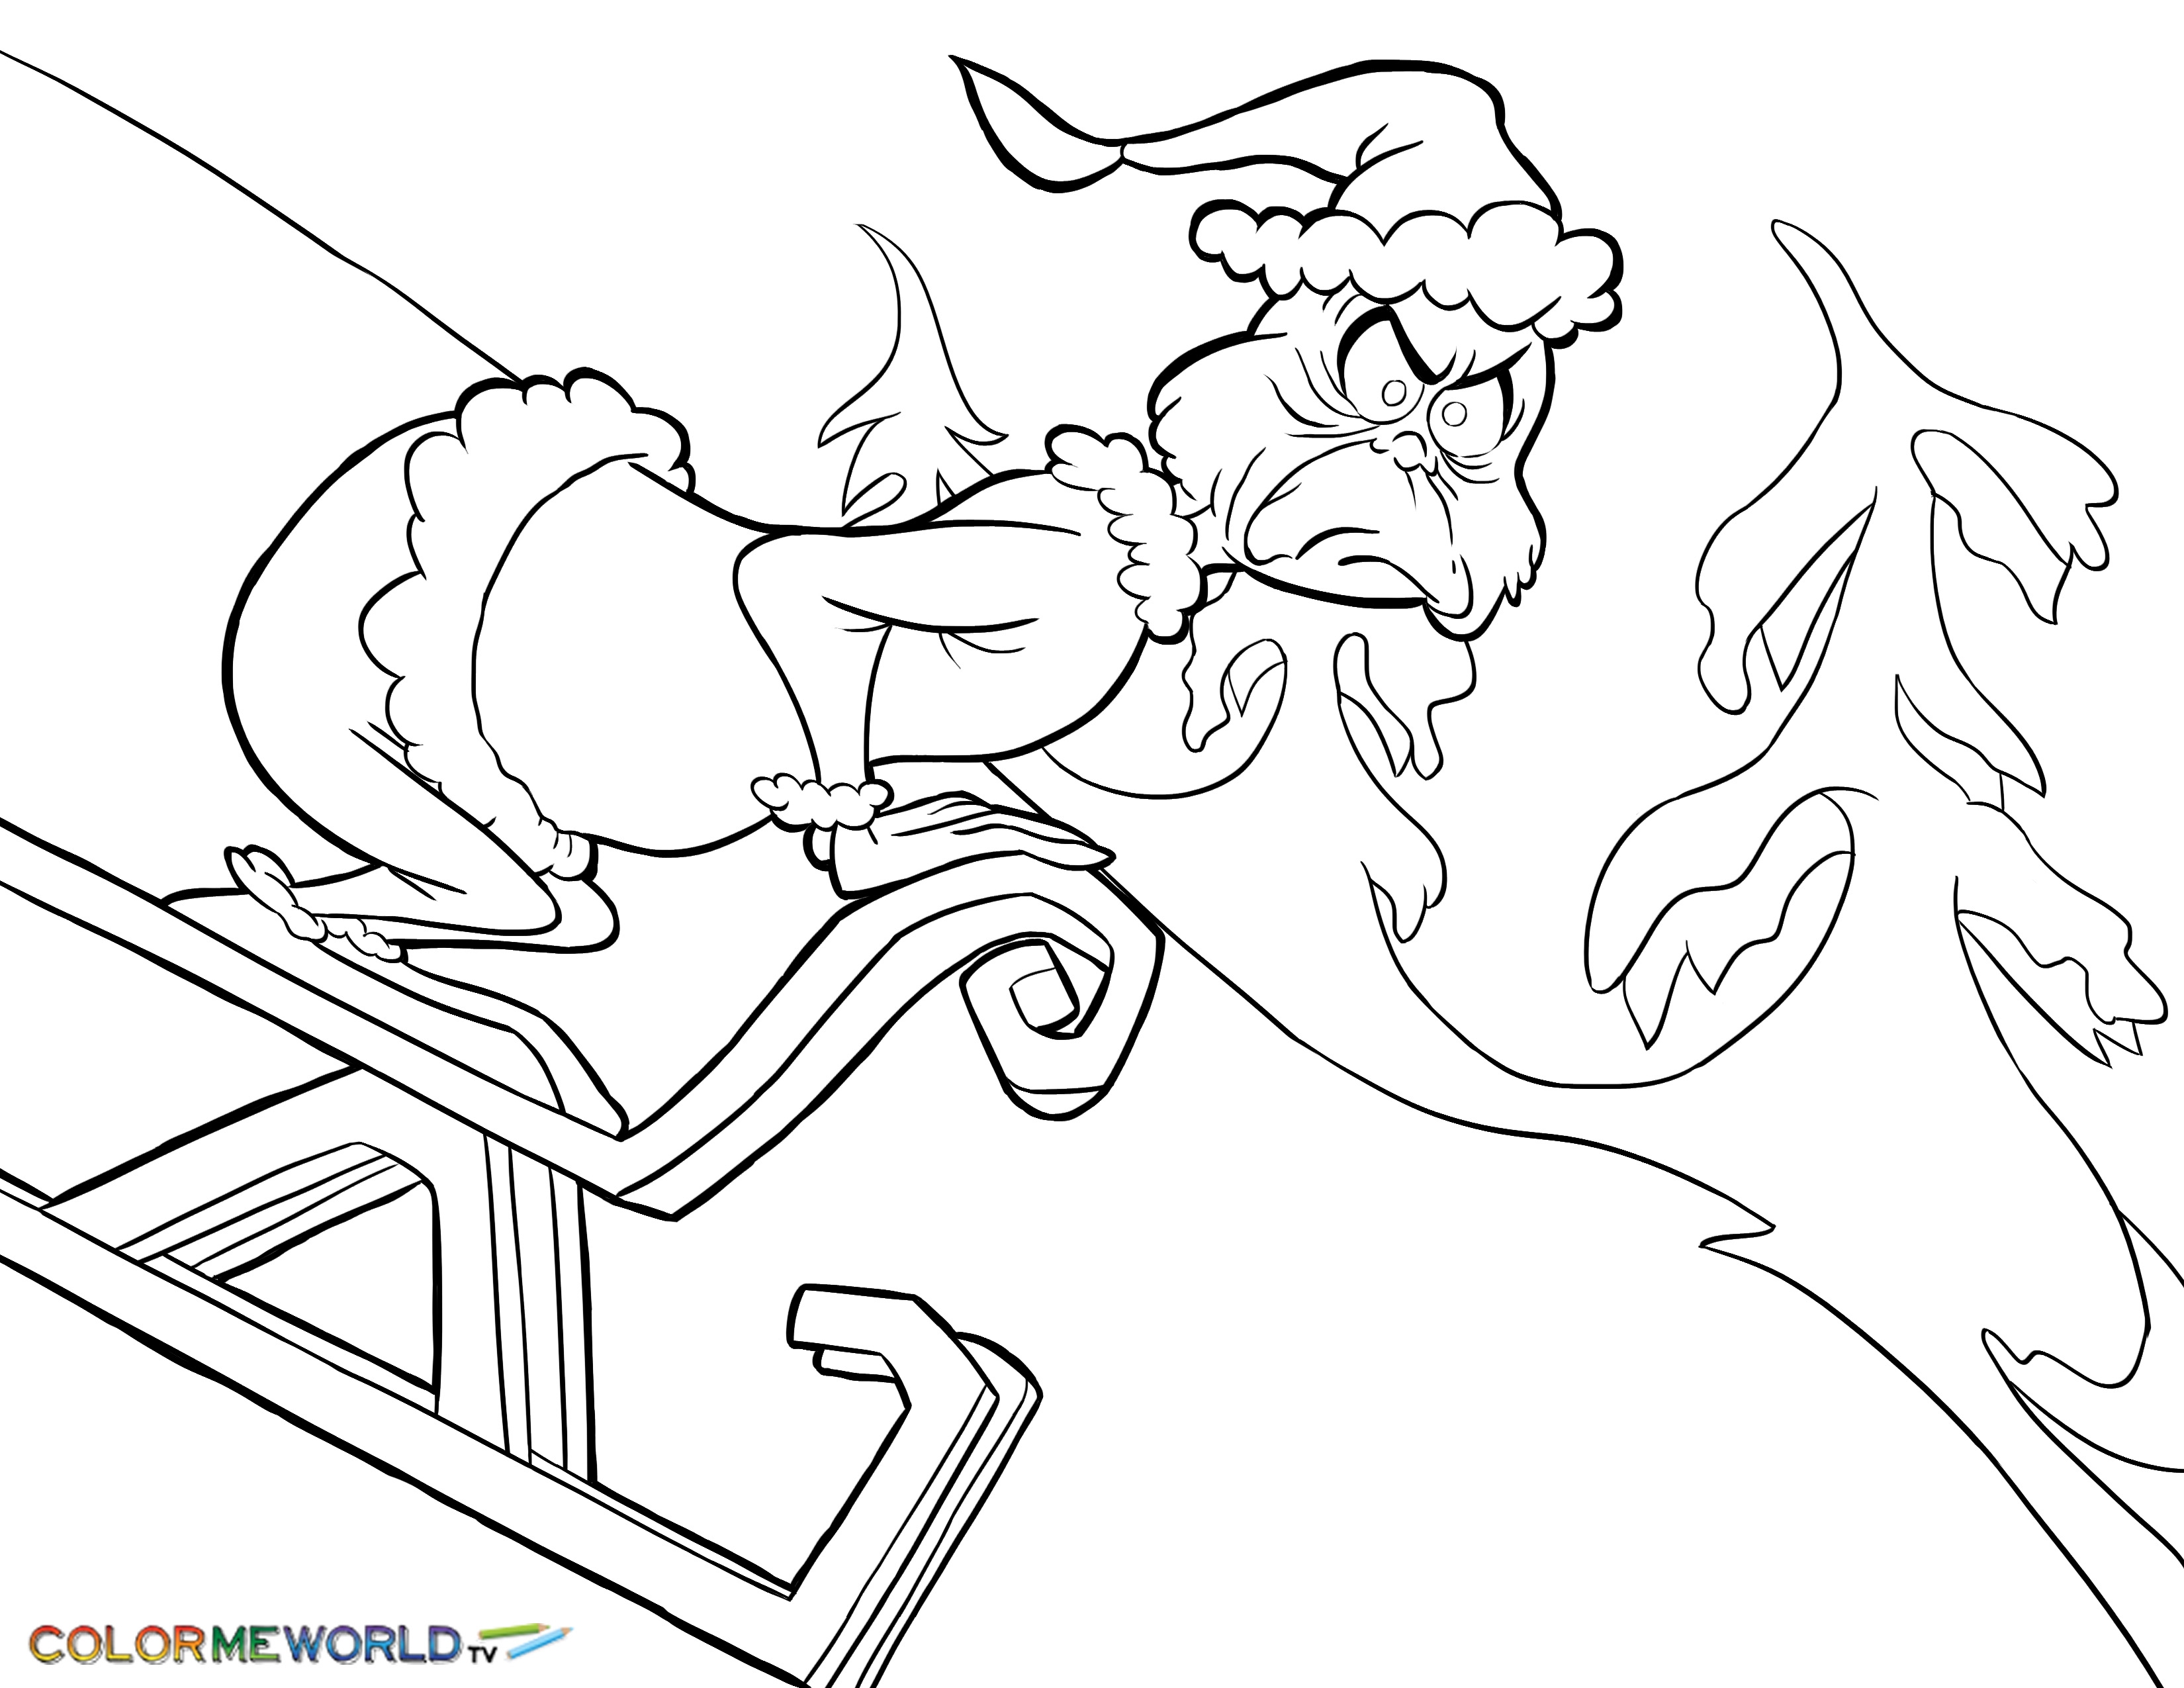 The Grinch Who Stole Christmas Coloring Pages at GetColorings.com